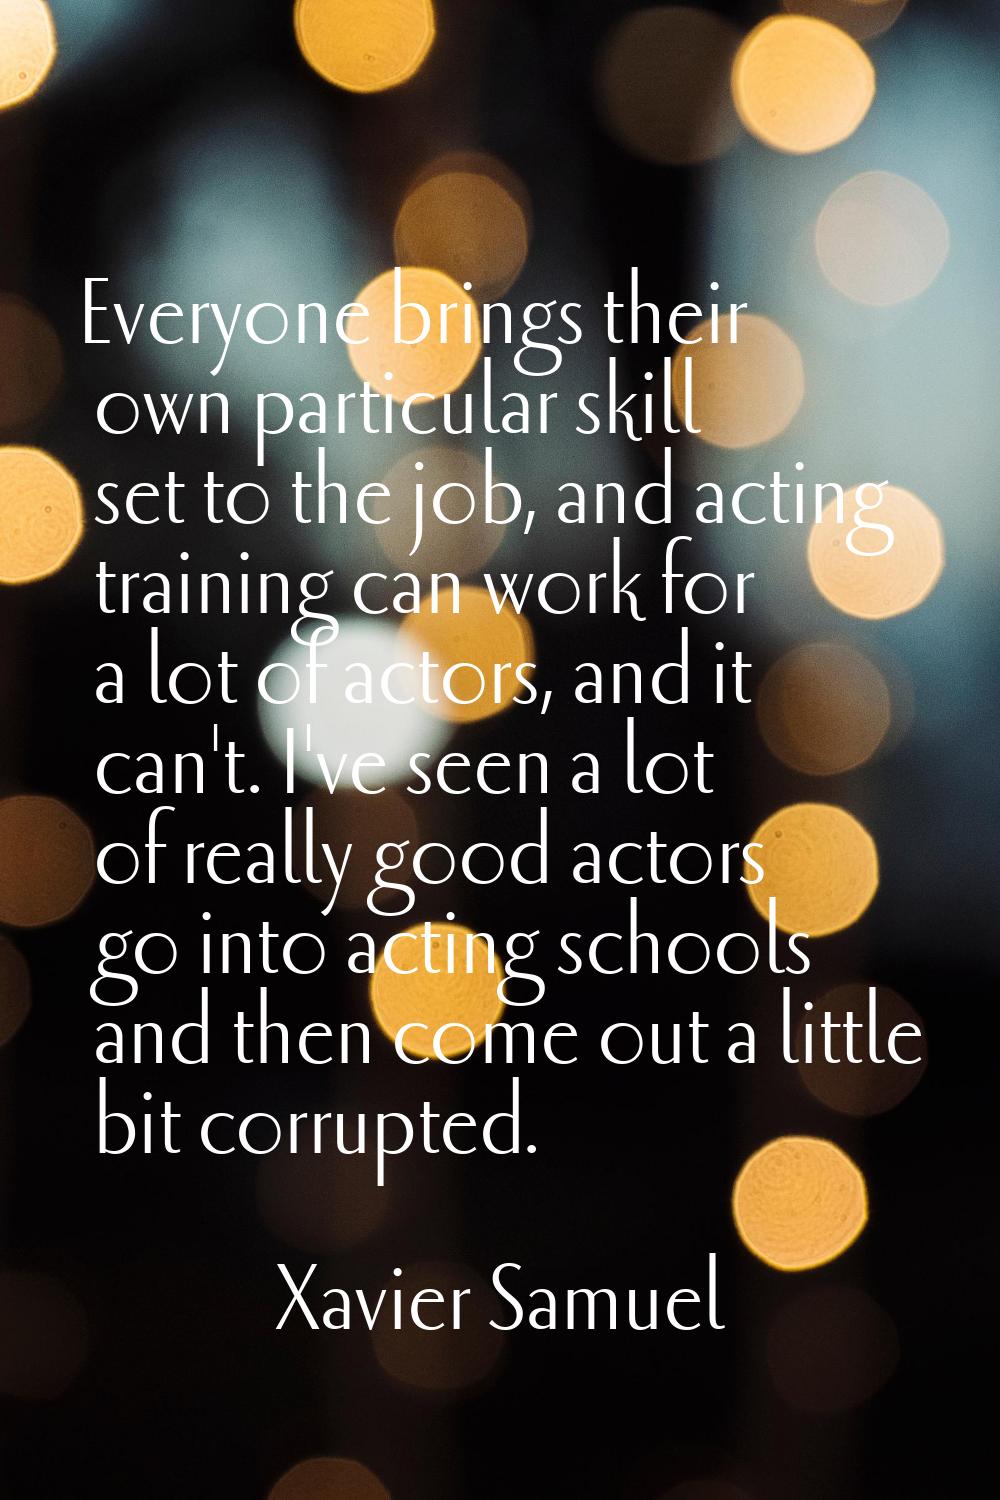 Everyone brings their own particular skill set to the job, and acting training can work for a lot o